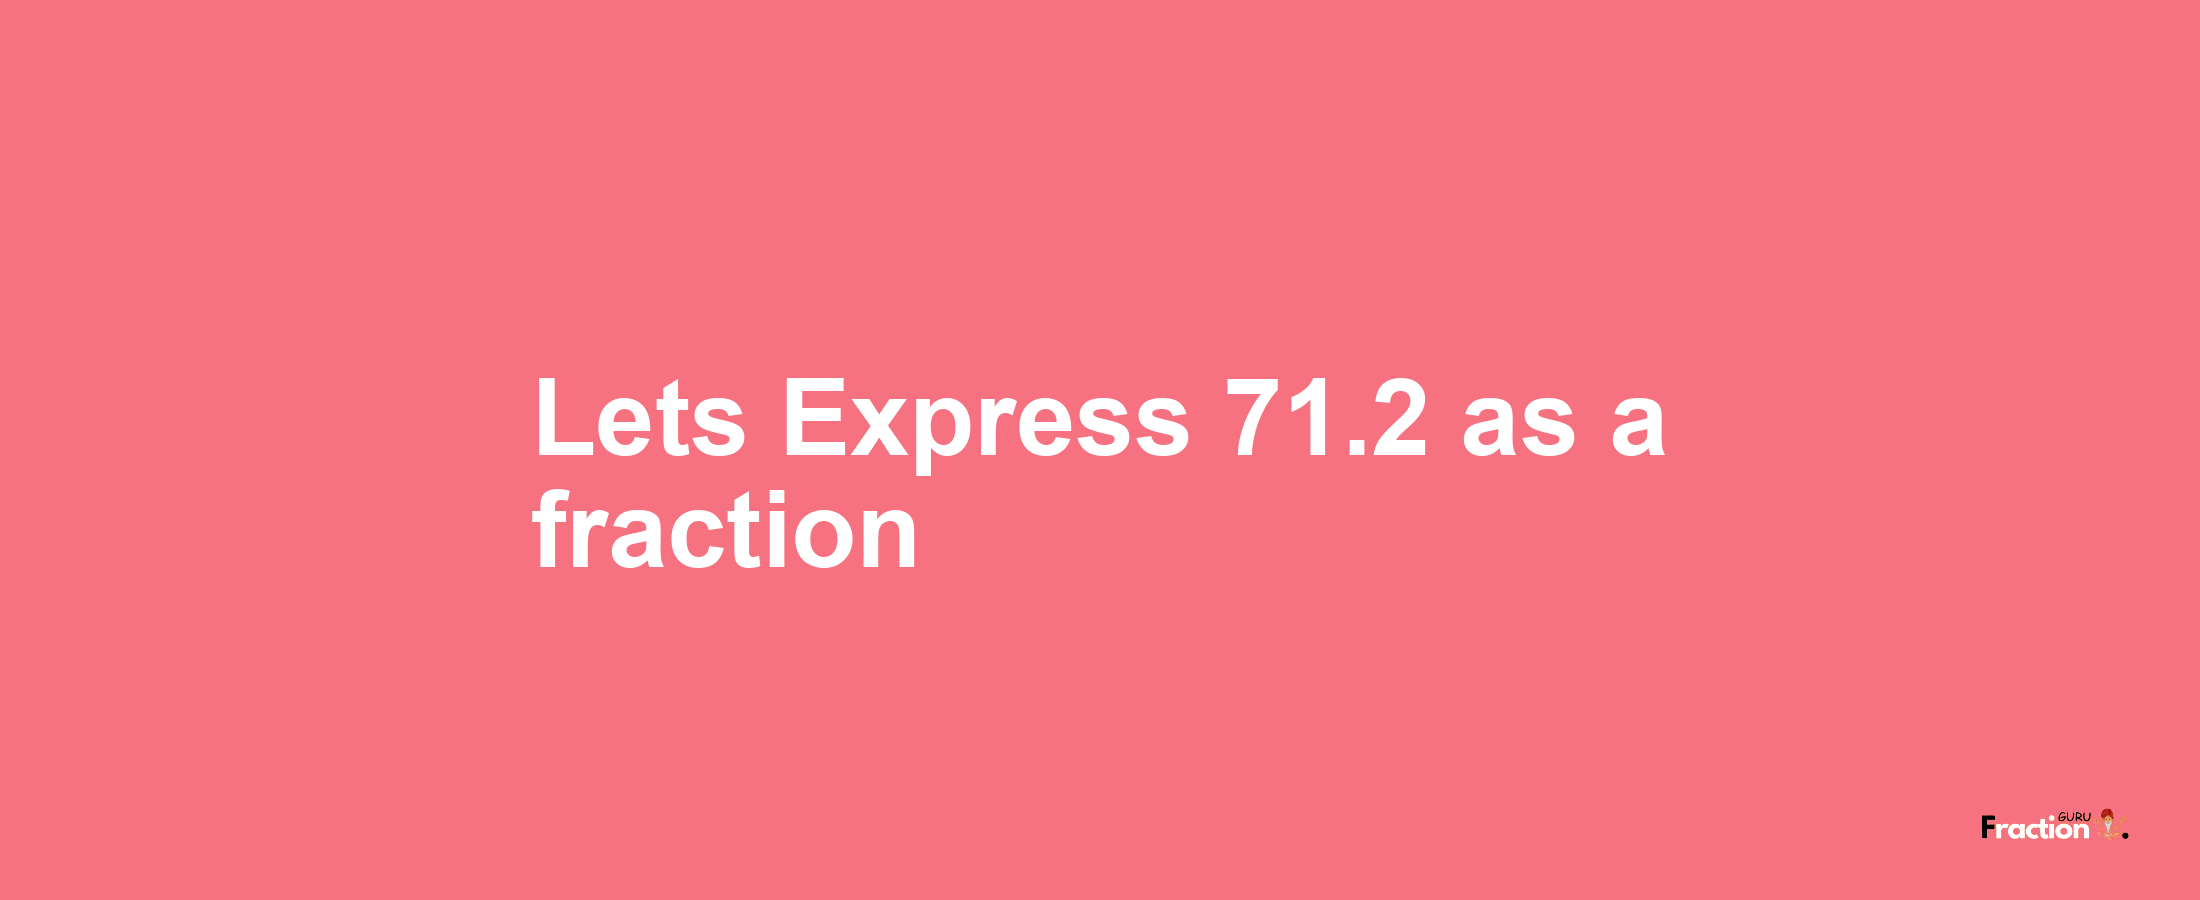 Lets Express 71.2 as afraction